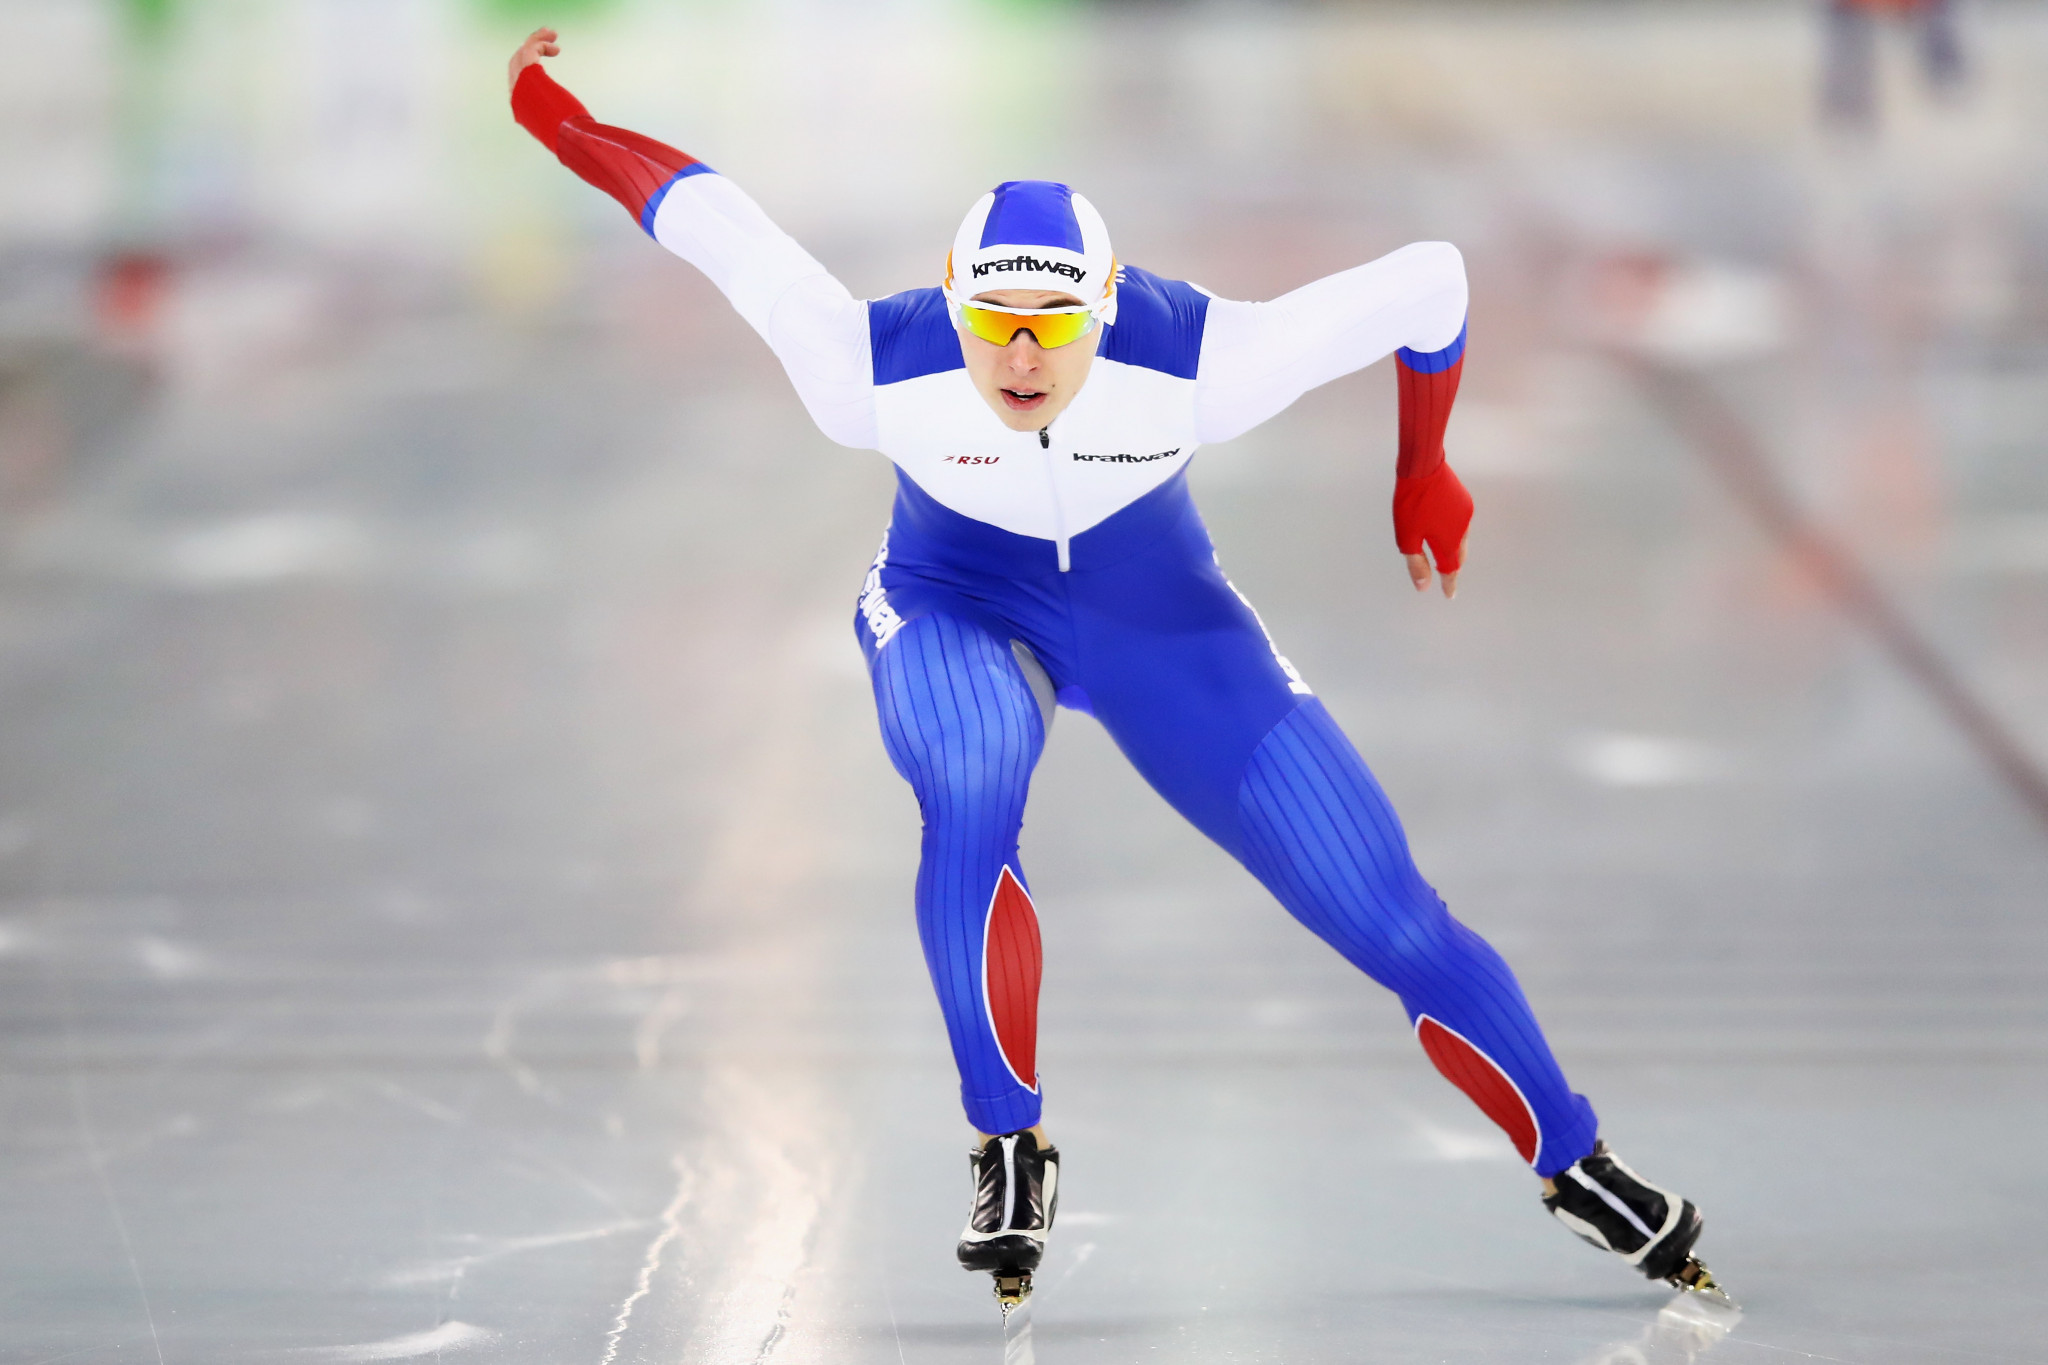 Russian speed skater Kazelin claims doping suspension caused by contaminated sports nutrition product